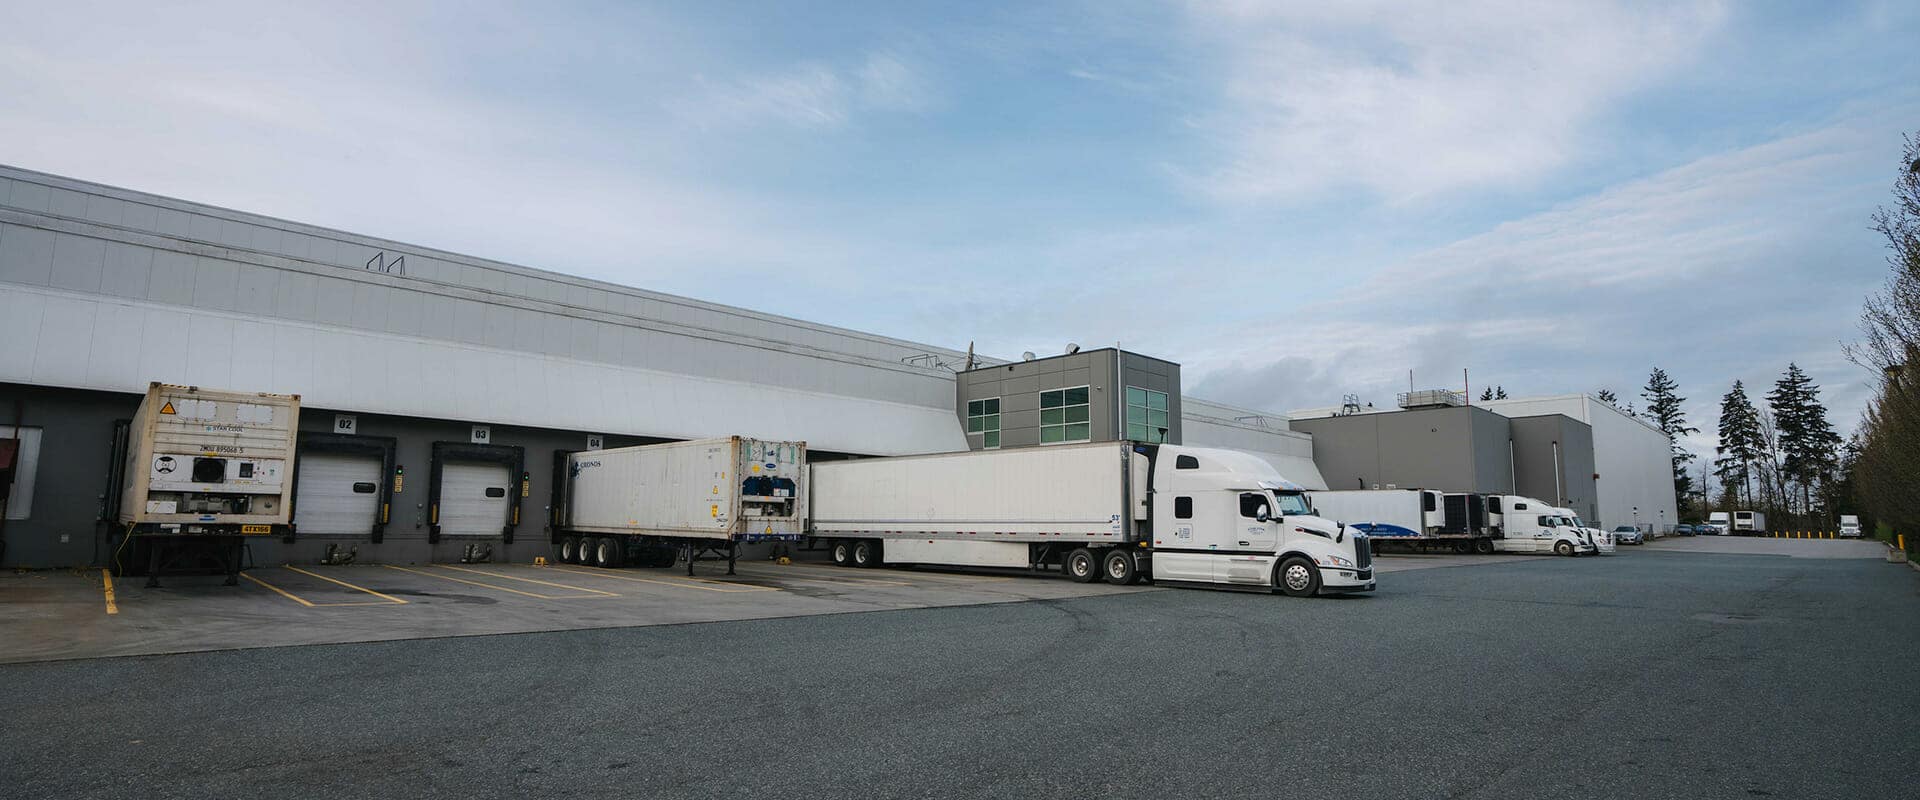 A transport truck unloading at a warehouse dock